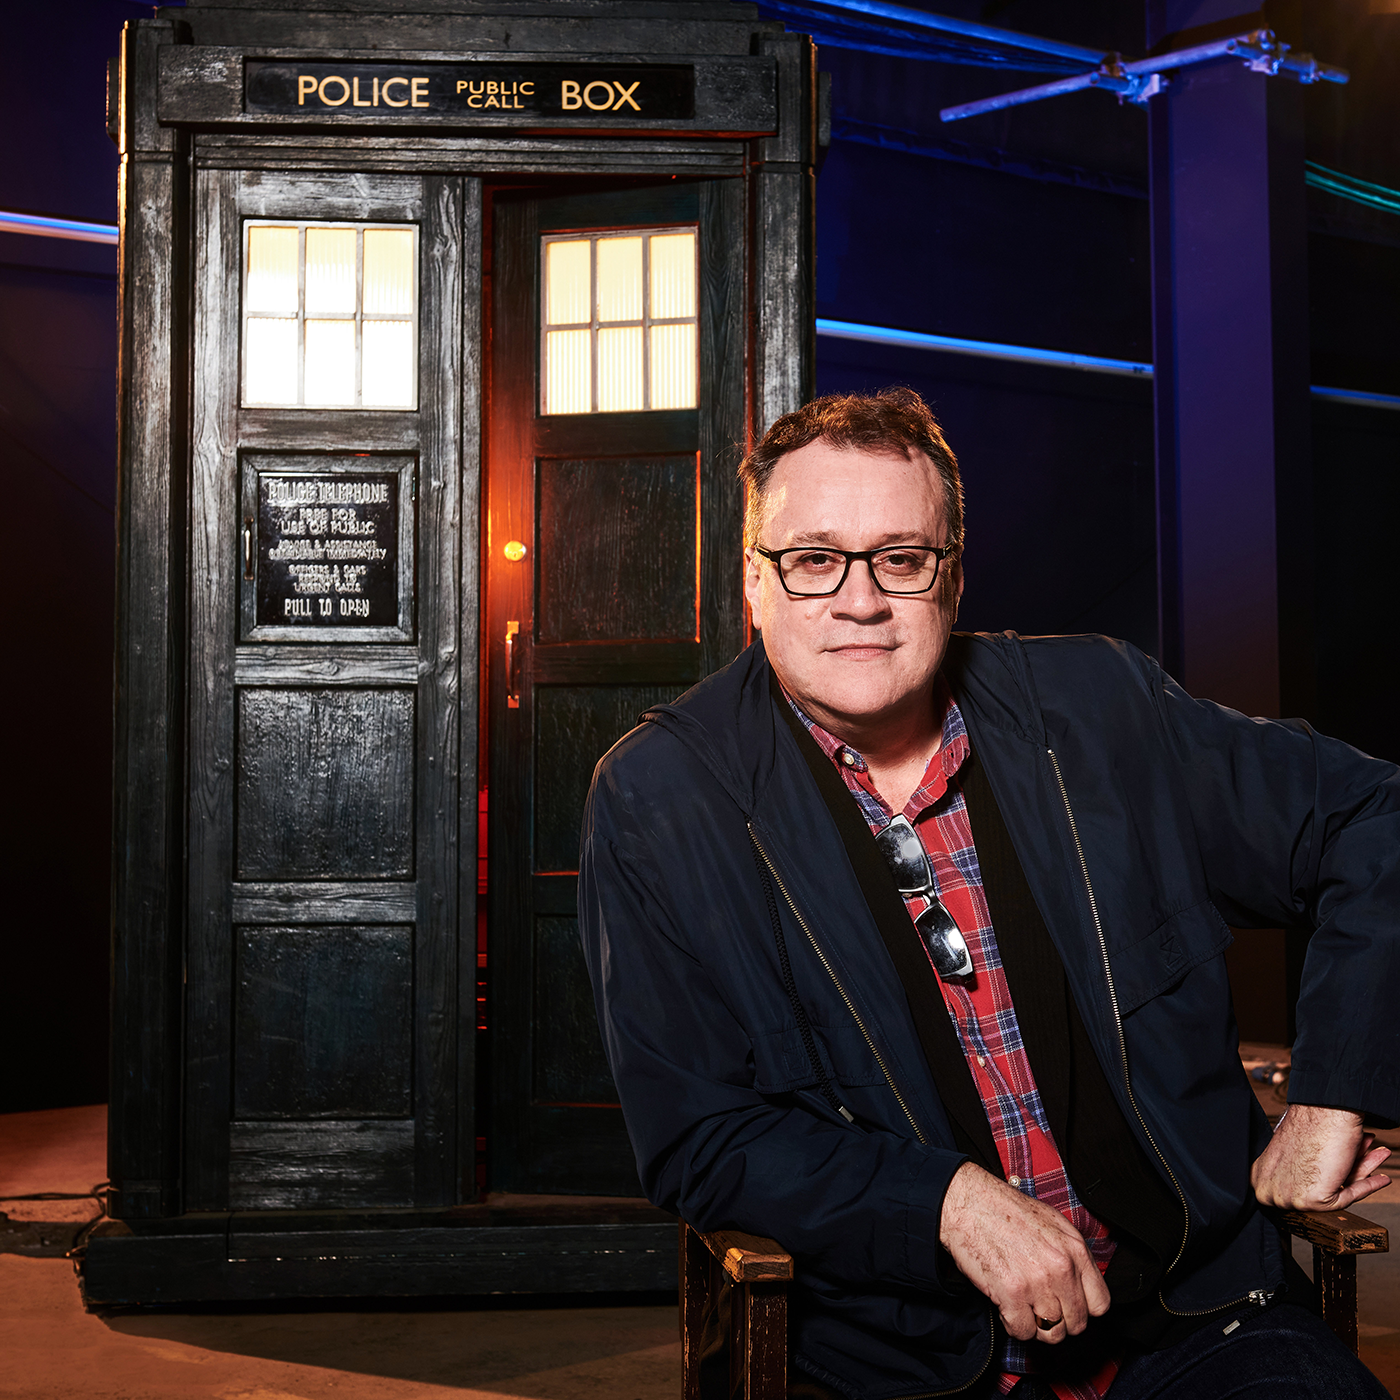 TARDIS Talk: Space, Time, and “Doctor Who” with Russell T. Davies